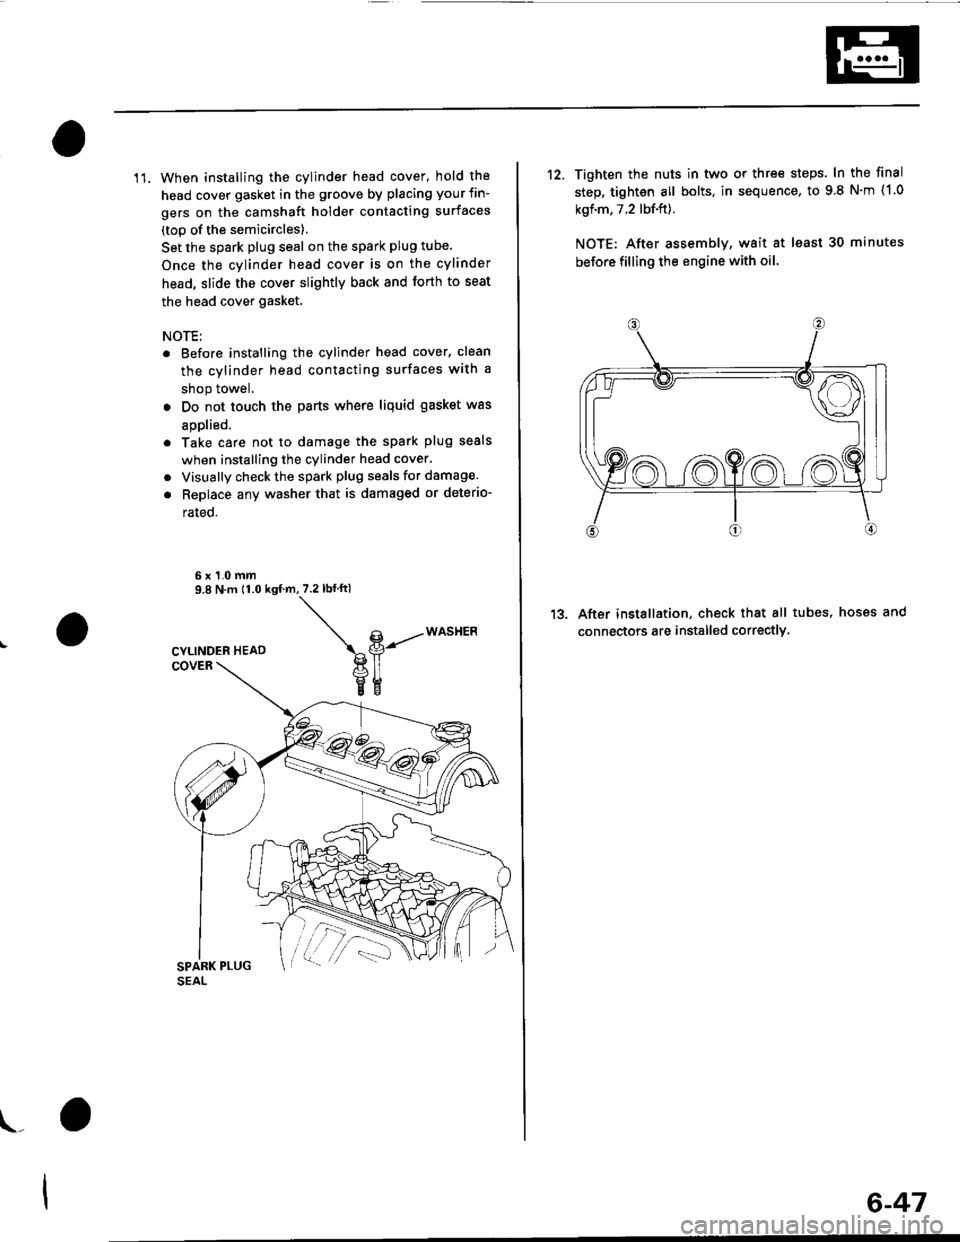 HONDA CIVIC 2000 6.G Owners Guide 11. When installing the cylinder head cover, hold the
head cover gasket in the groove by placing your fin-
gers on the camshaft holder contacting surfaces
(top of the semicircles)
Set the spark plug s